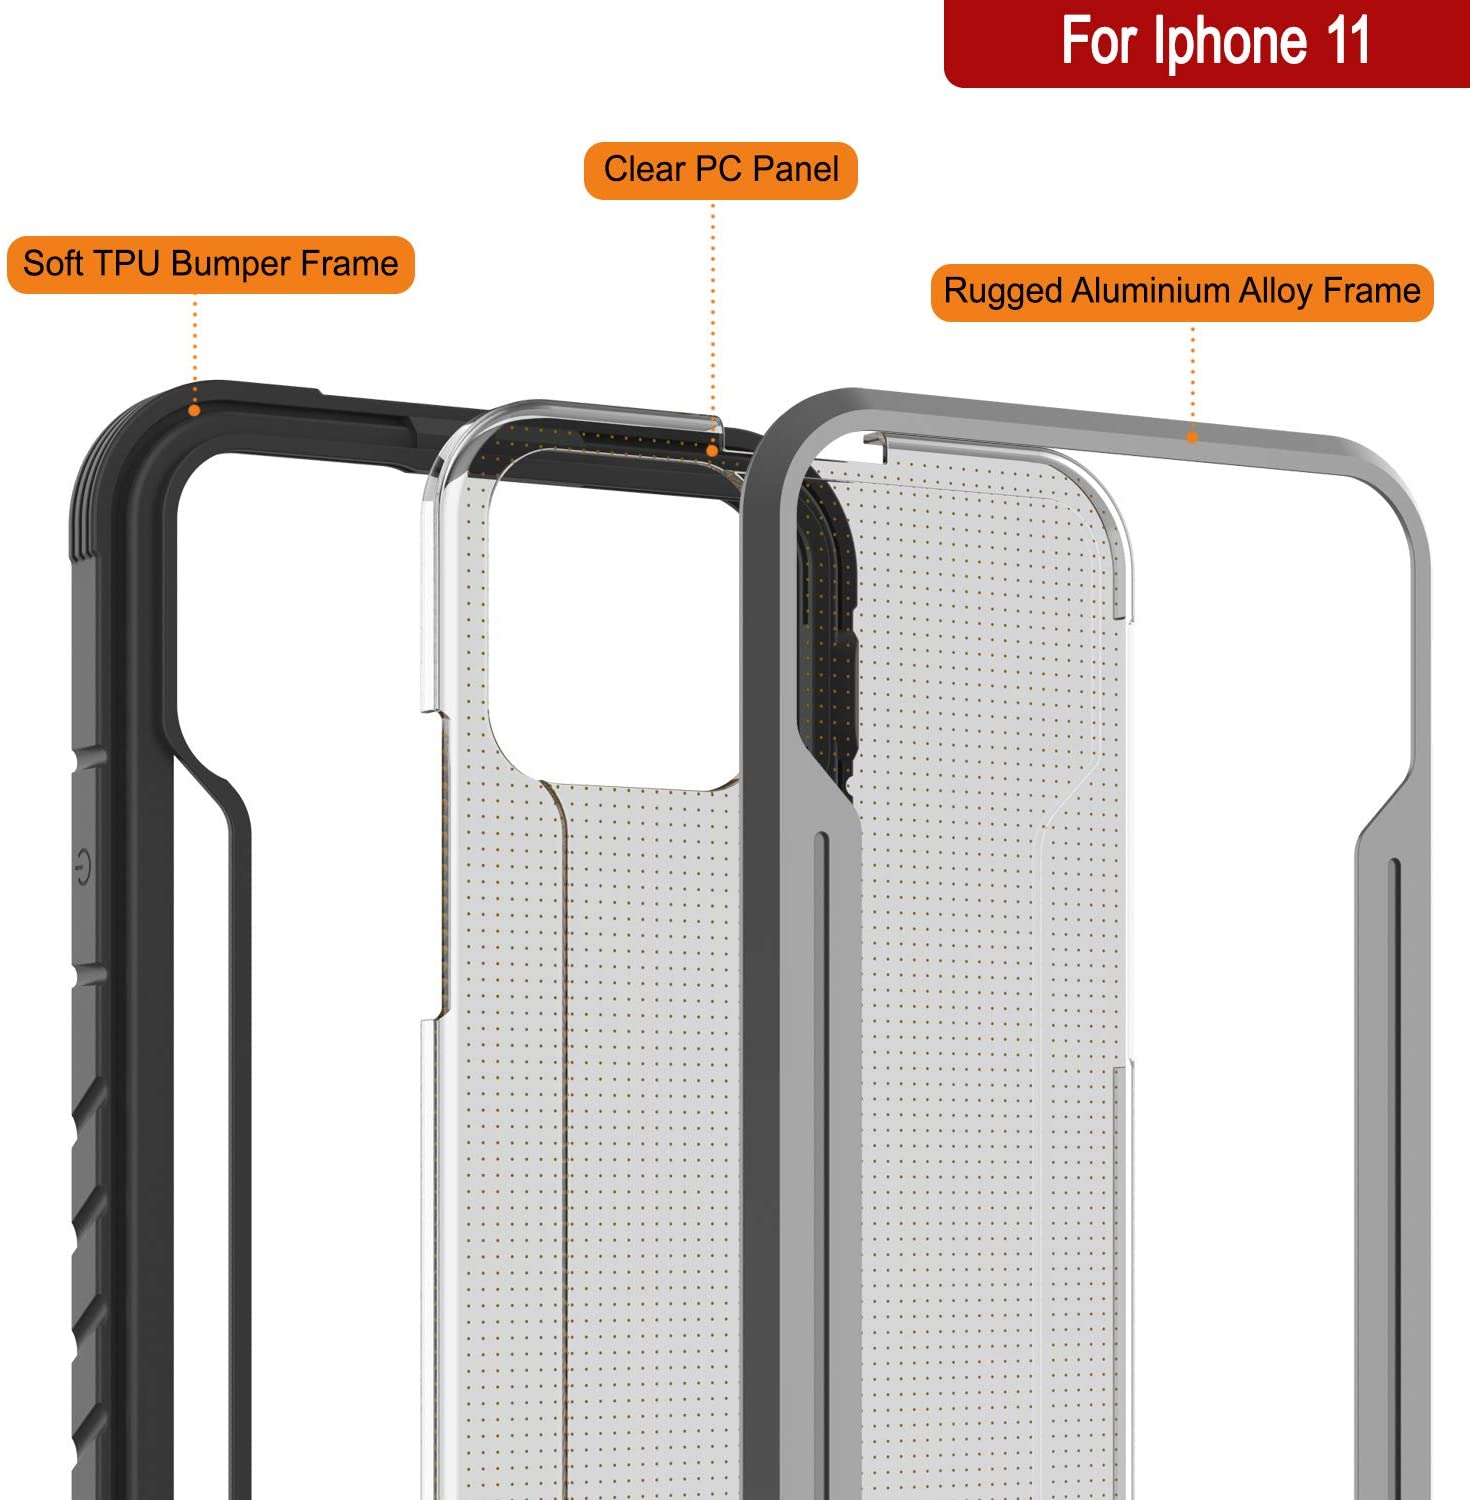 Punkcase iPhone 11 ravenger Case Protective Military Grade Multilayer Cover [Grey-Black]